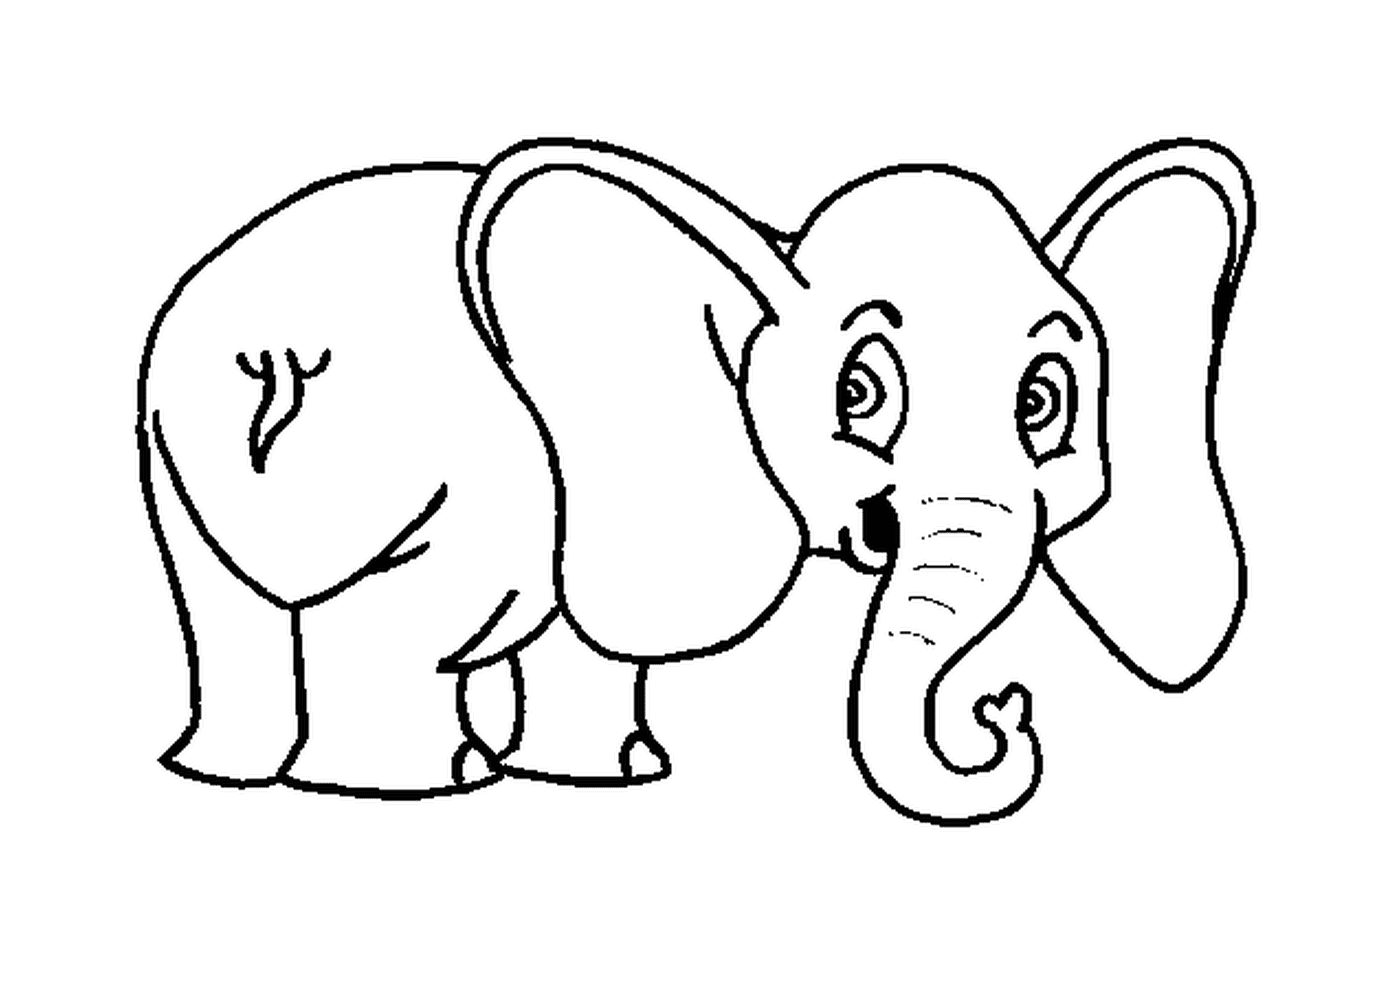  An elephant drawn with large ears 